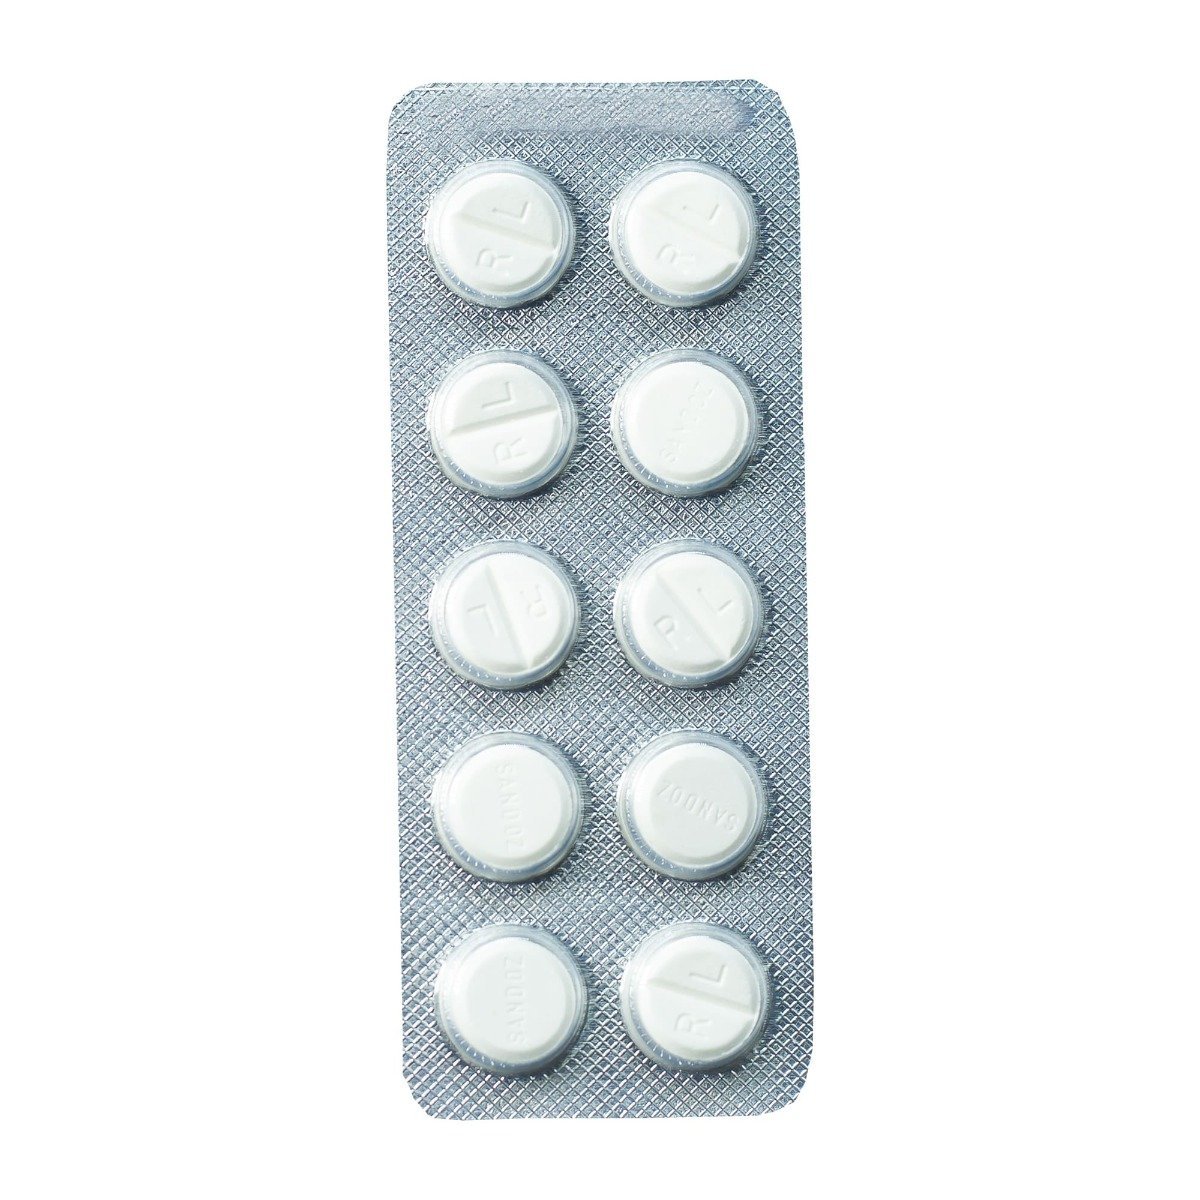 Sirdalud 4 mg - 20 Tablets - Bloom Pharmacy